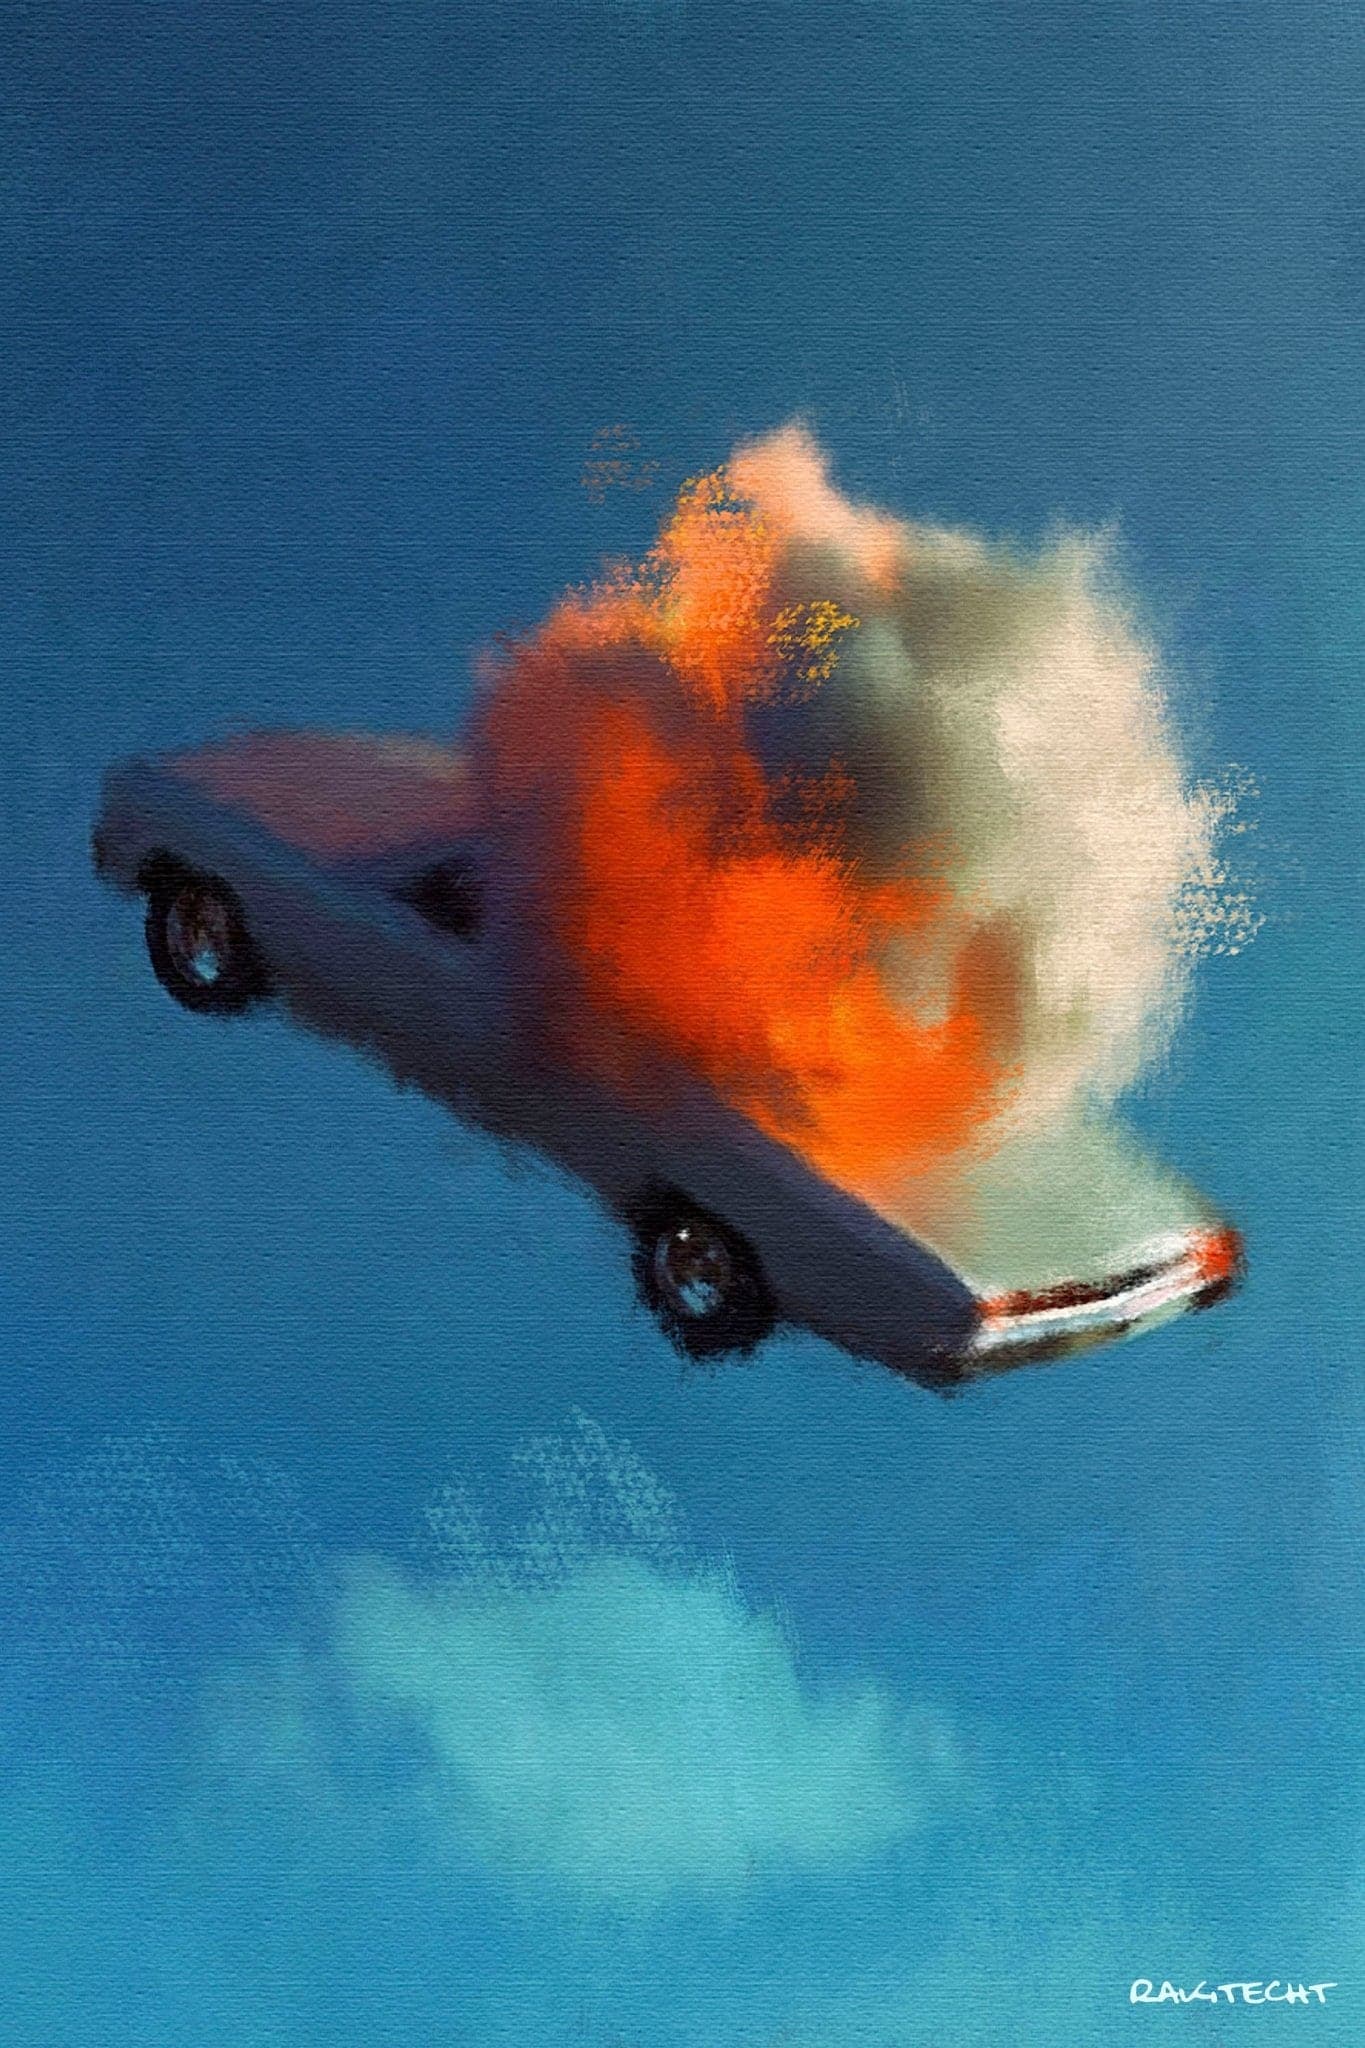 Exploding Car Poster - Posters Plug